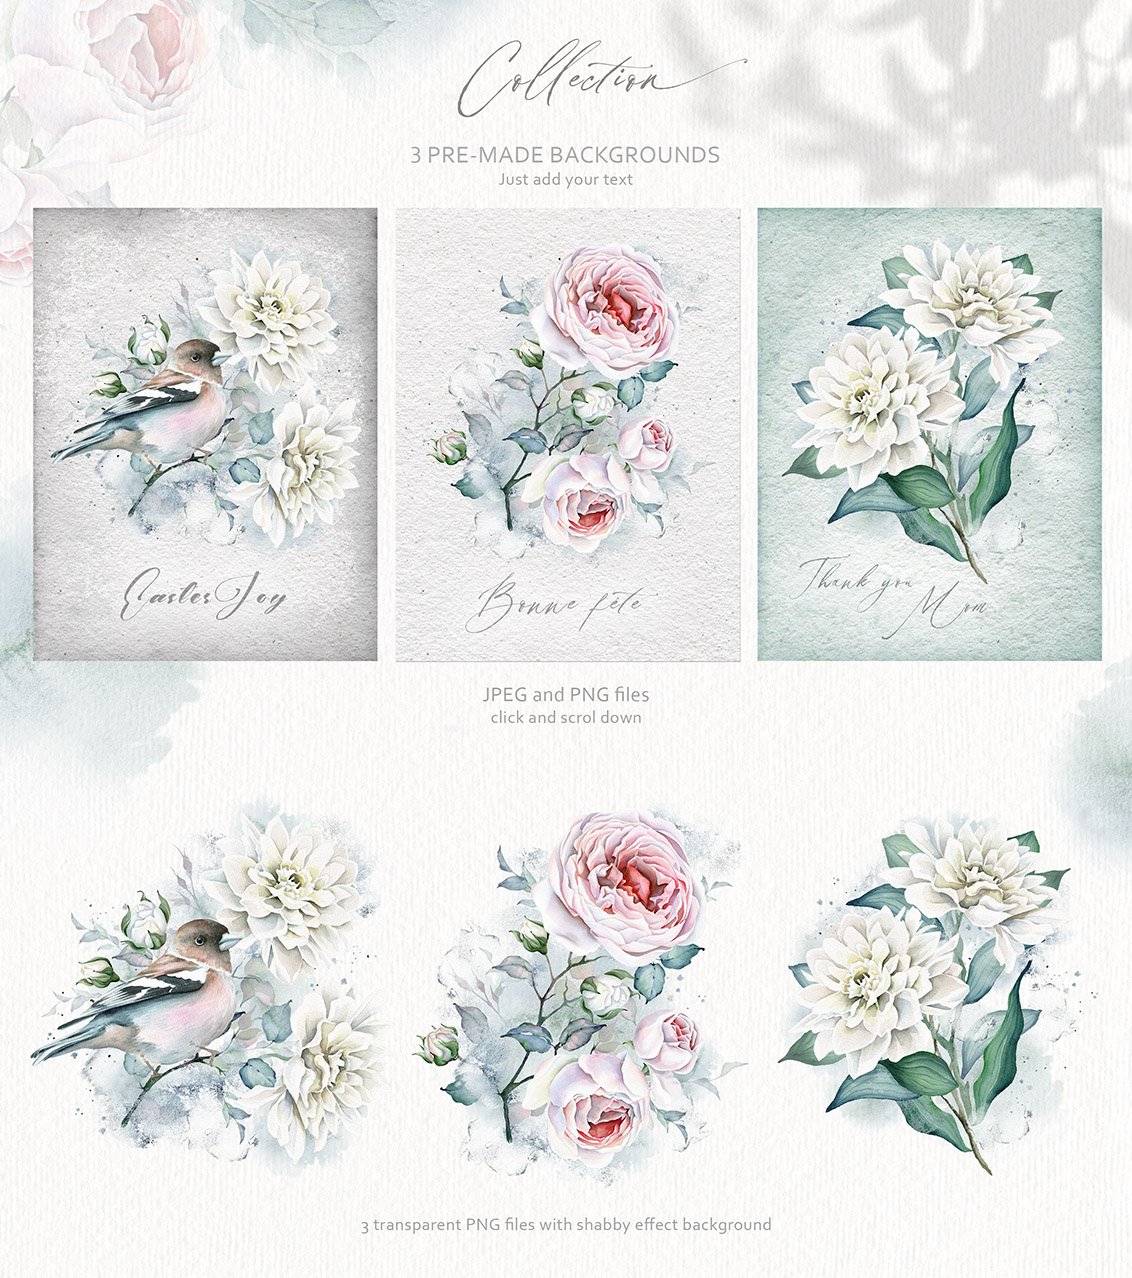 Watercolour Floral Illustrations and Alphabets